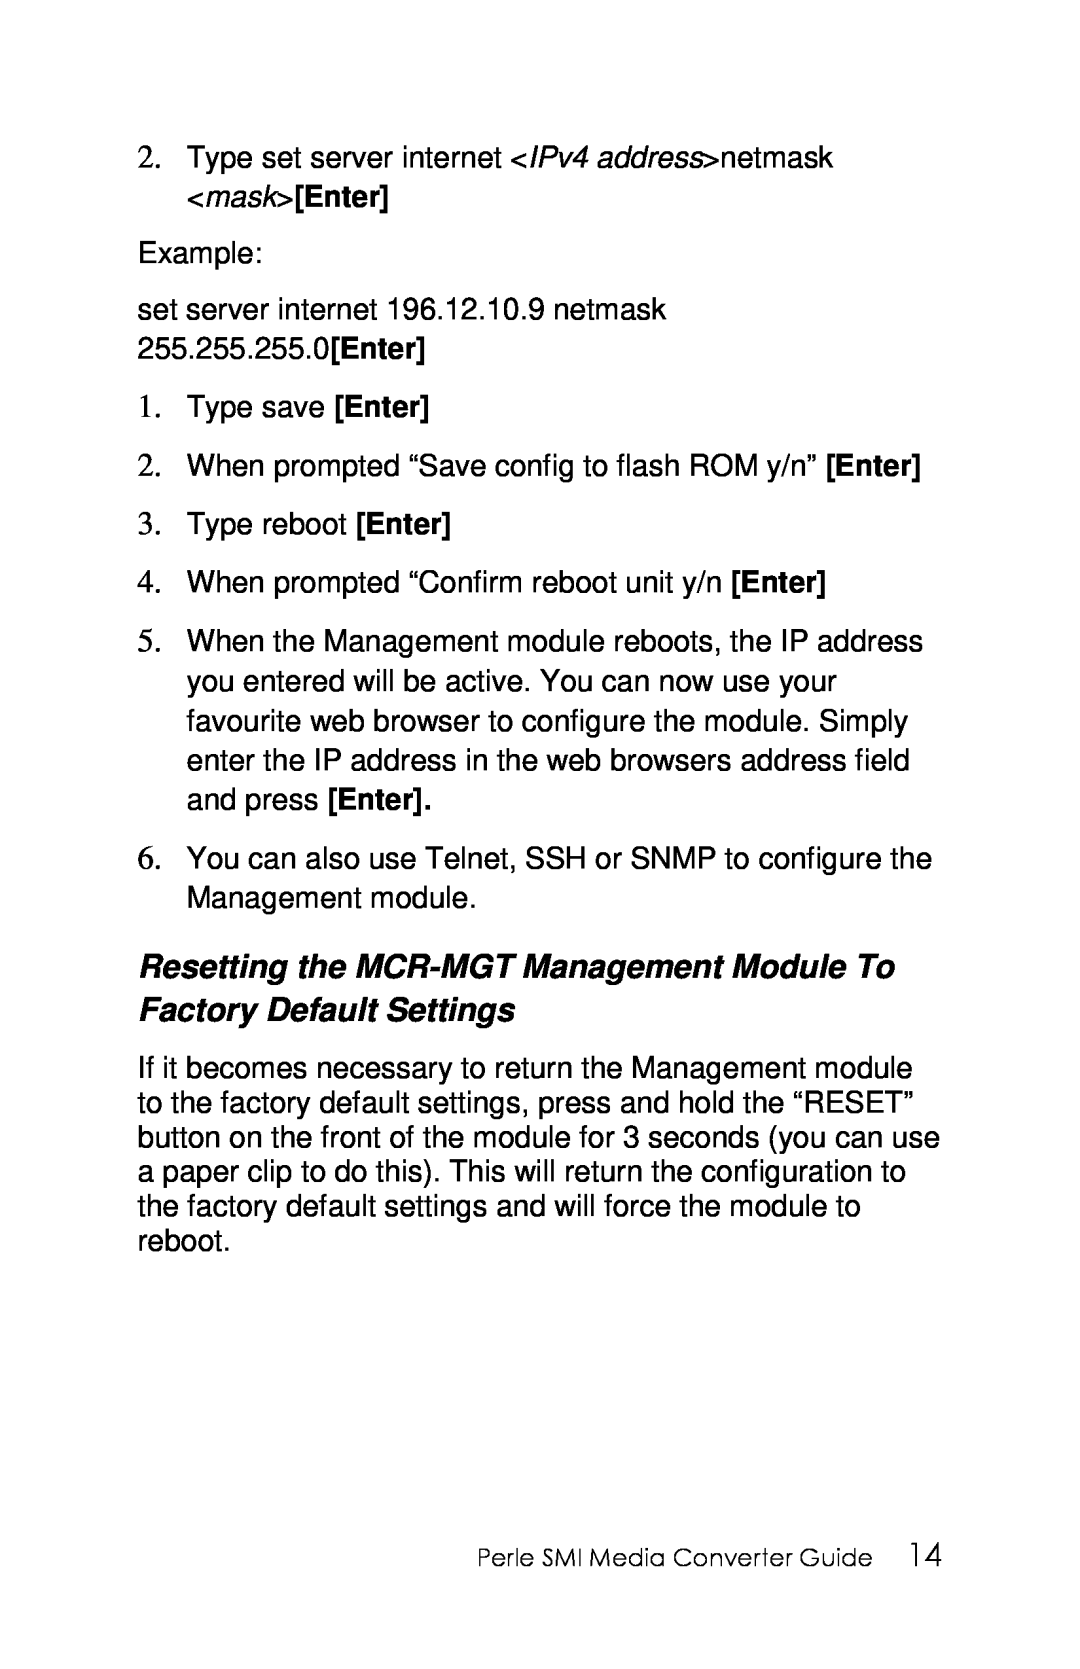 Perle Systems 5500316-13 manual Resetting the MCR-MGT Management Module To Factory Default Settings 